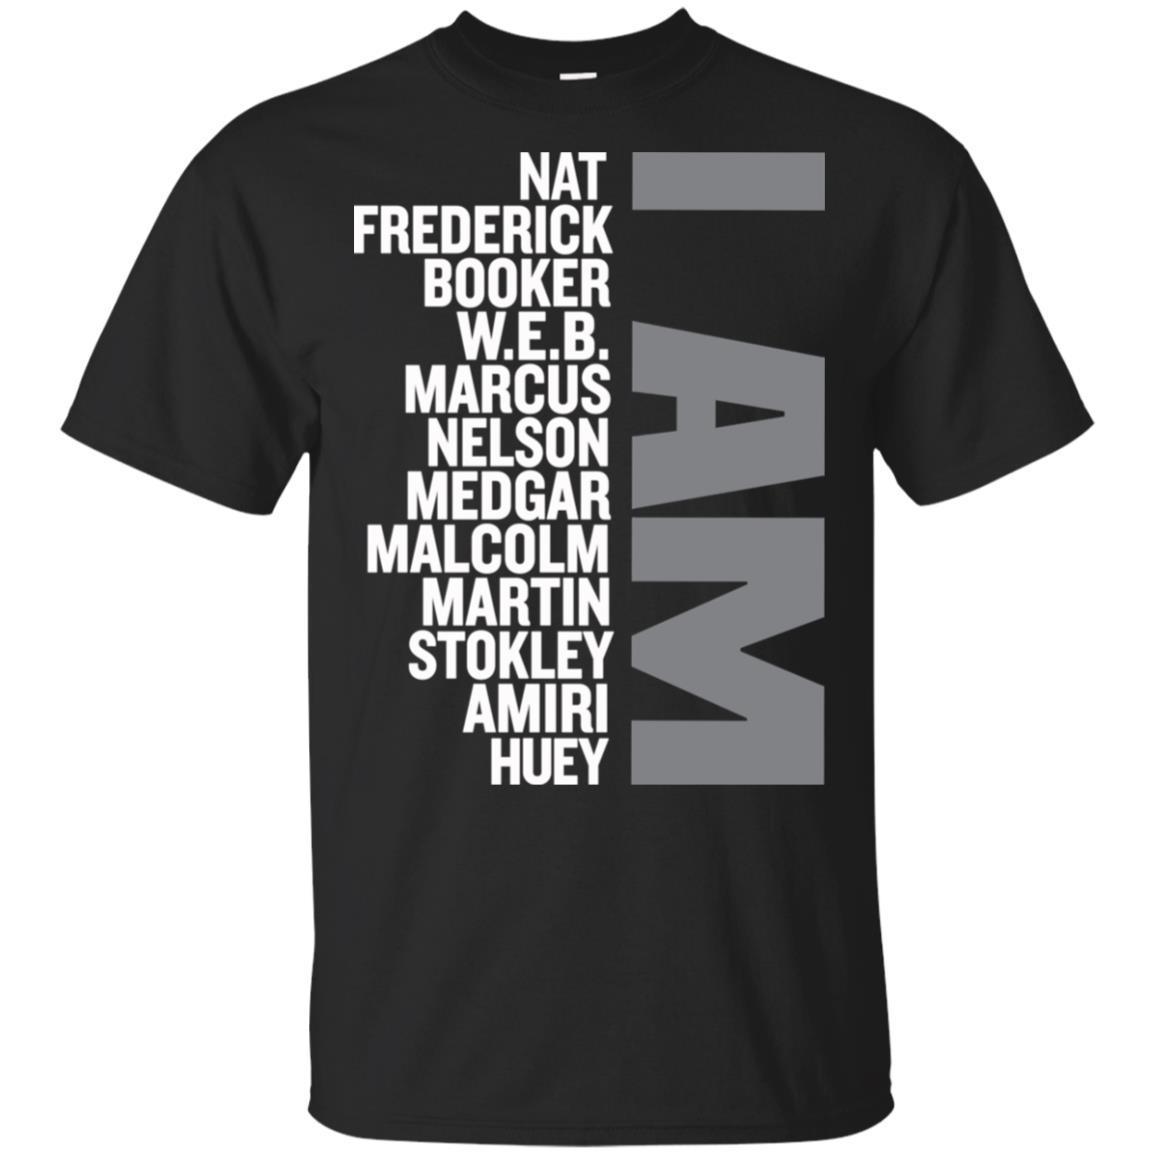 I Am Black History Shirt African-American History Month Tee